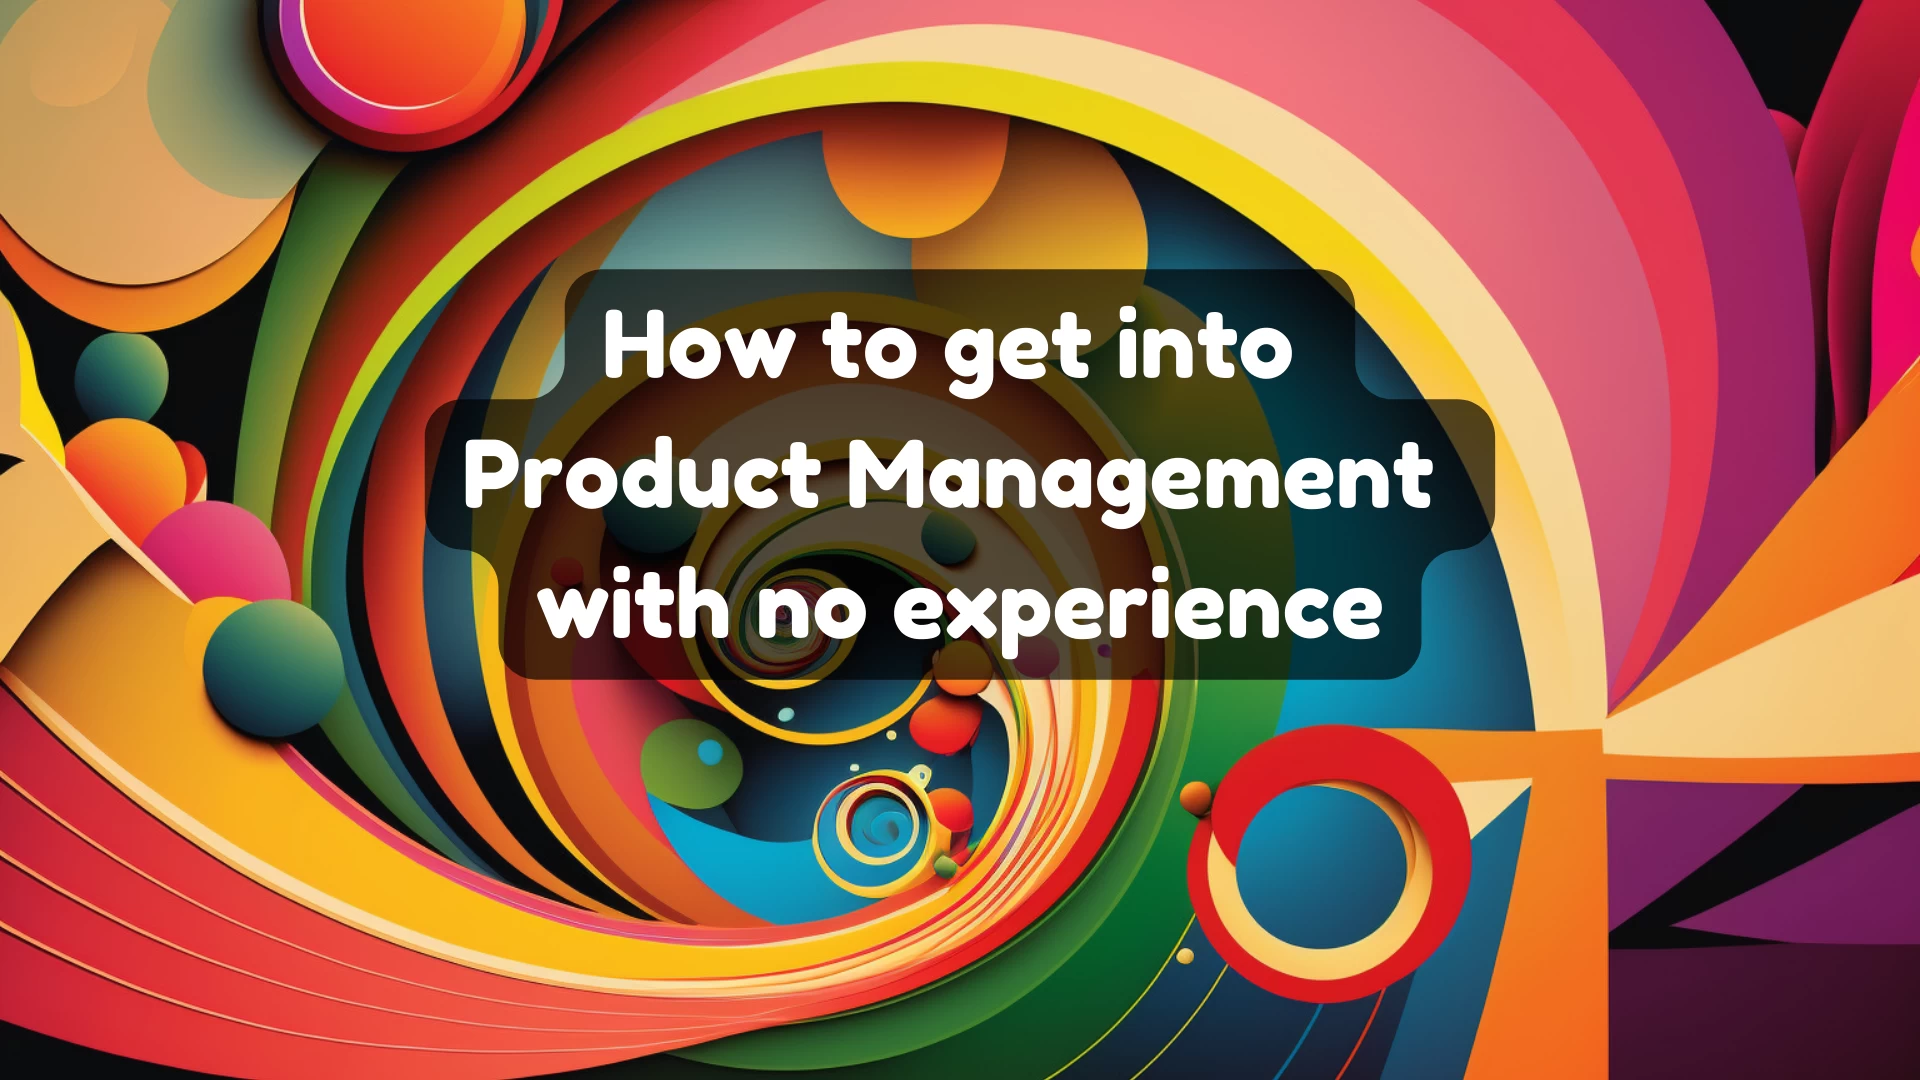 How to get into Product Management